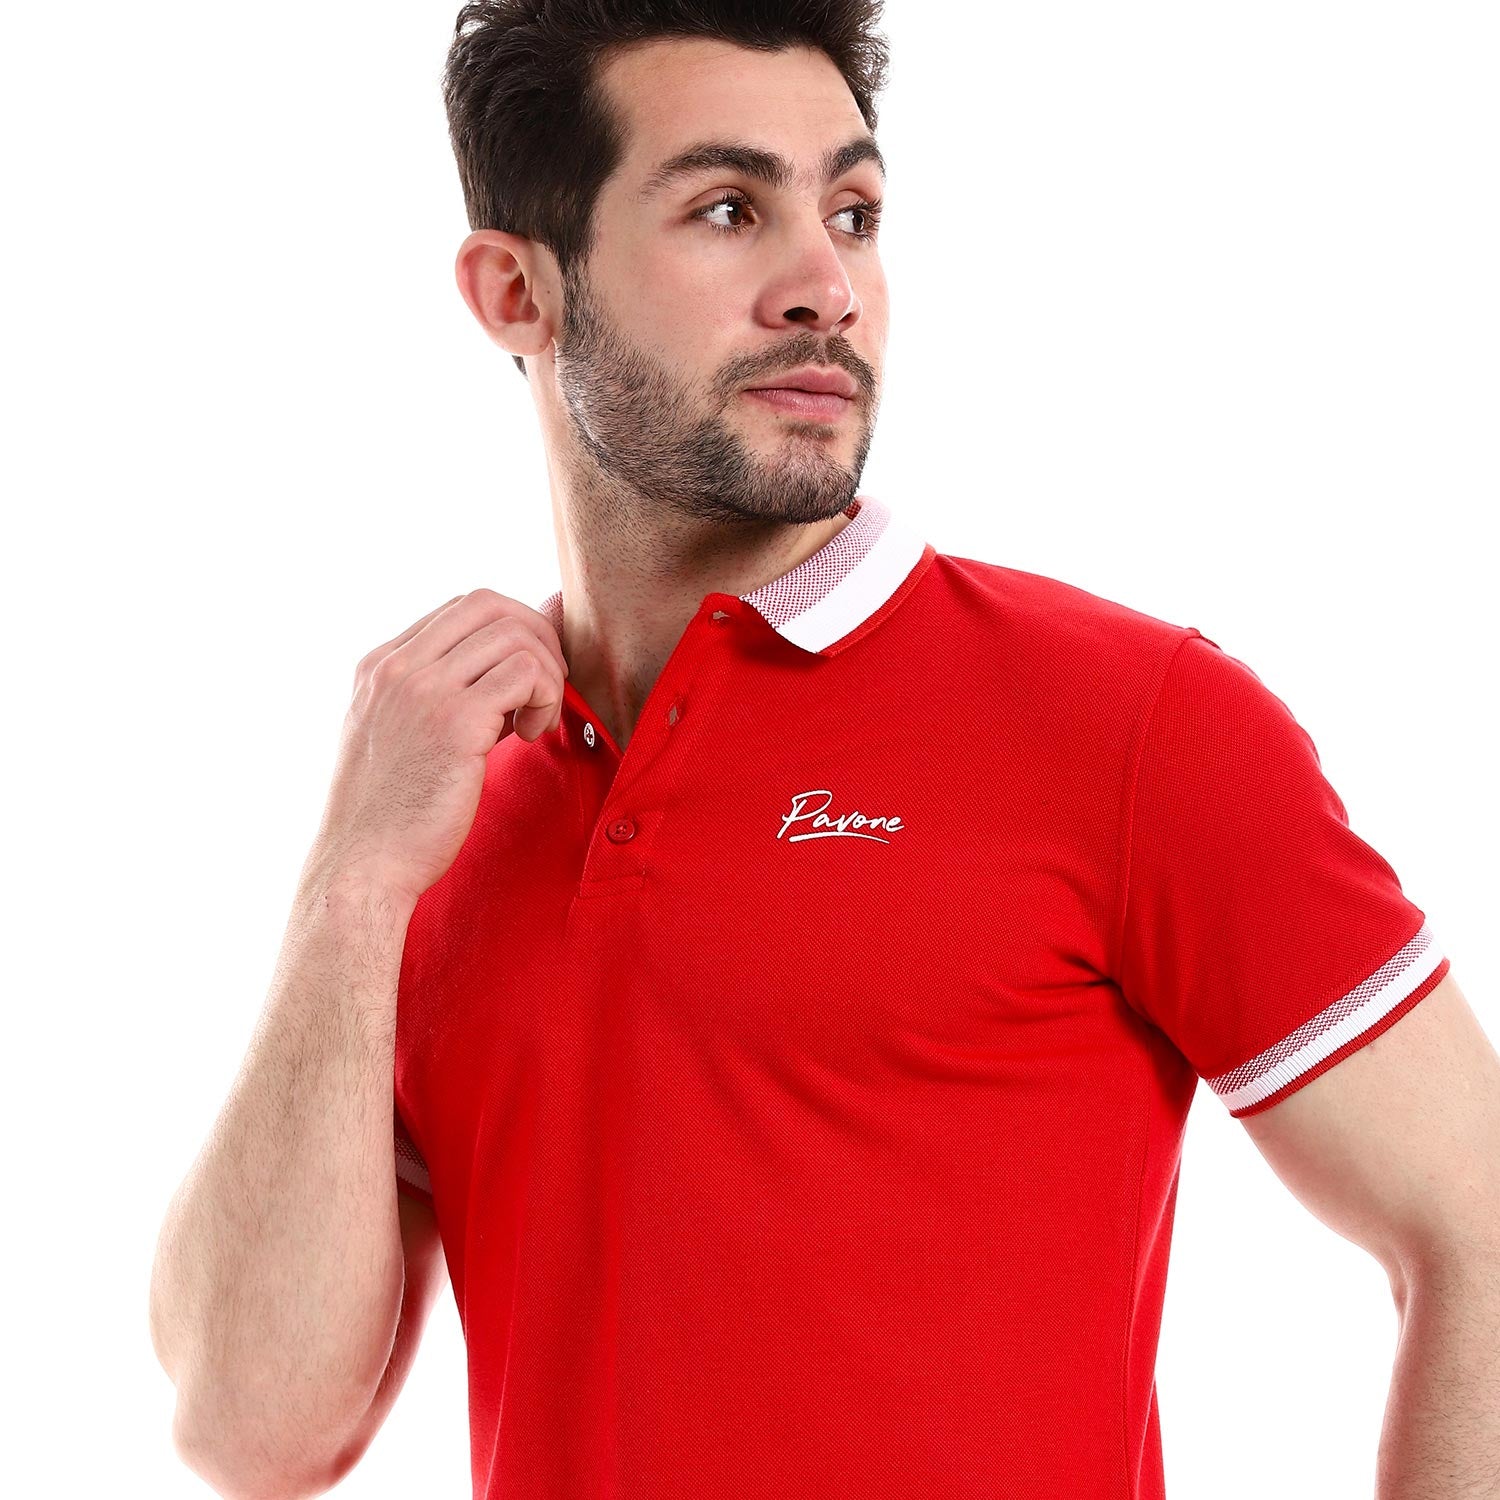 Pavone Turn Down Collar Pique Patterned Polo Shirt (7317)